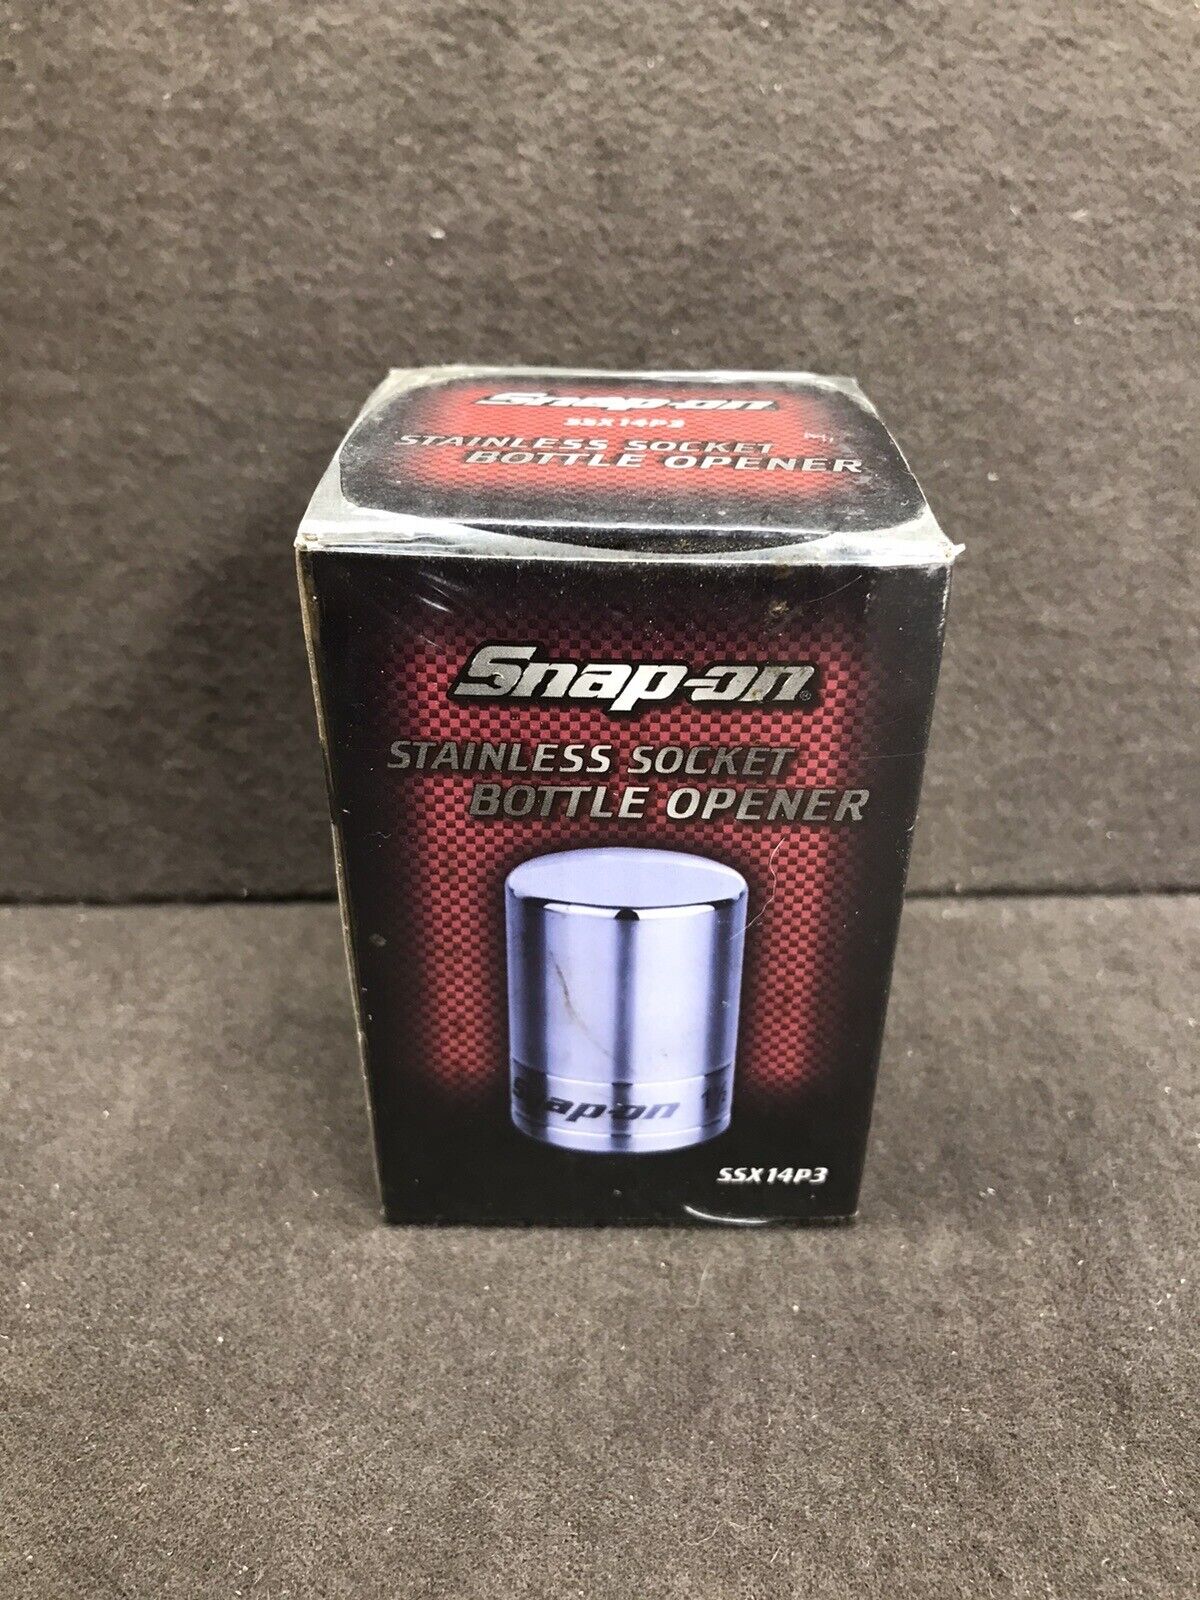 Snap-on Tools Stainless Socket Bottle Opener SSX14P3 New Sealed in Box